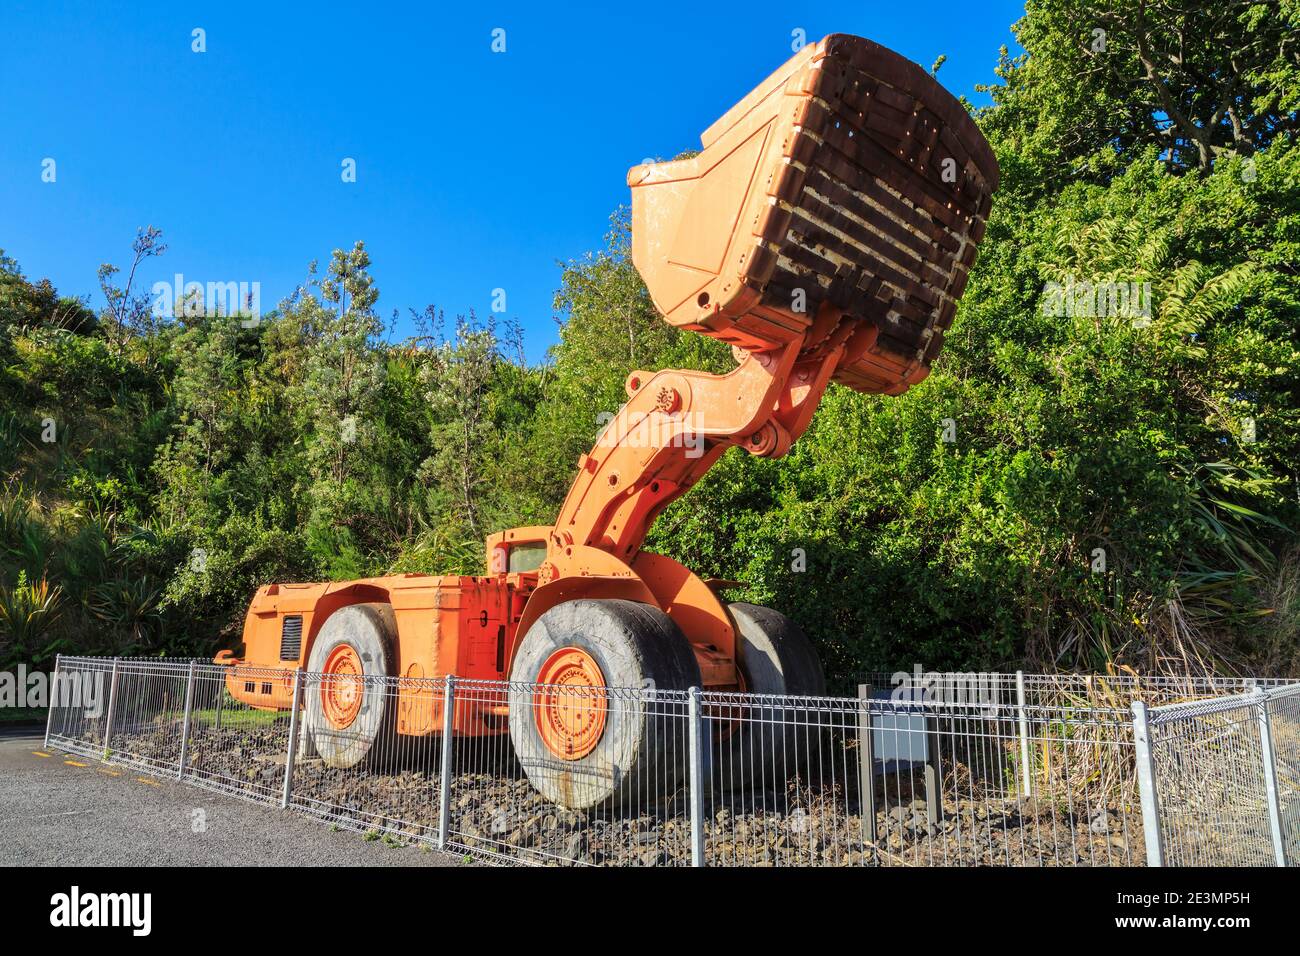 A giant 'bogger' (front-end loading earth moving machine) on display in Waihi, New Zealand Stock Photo